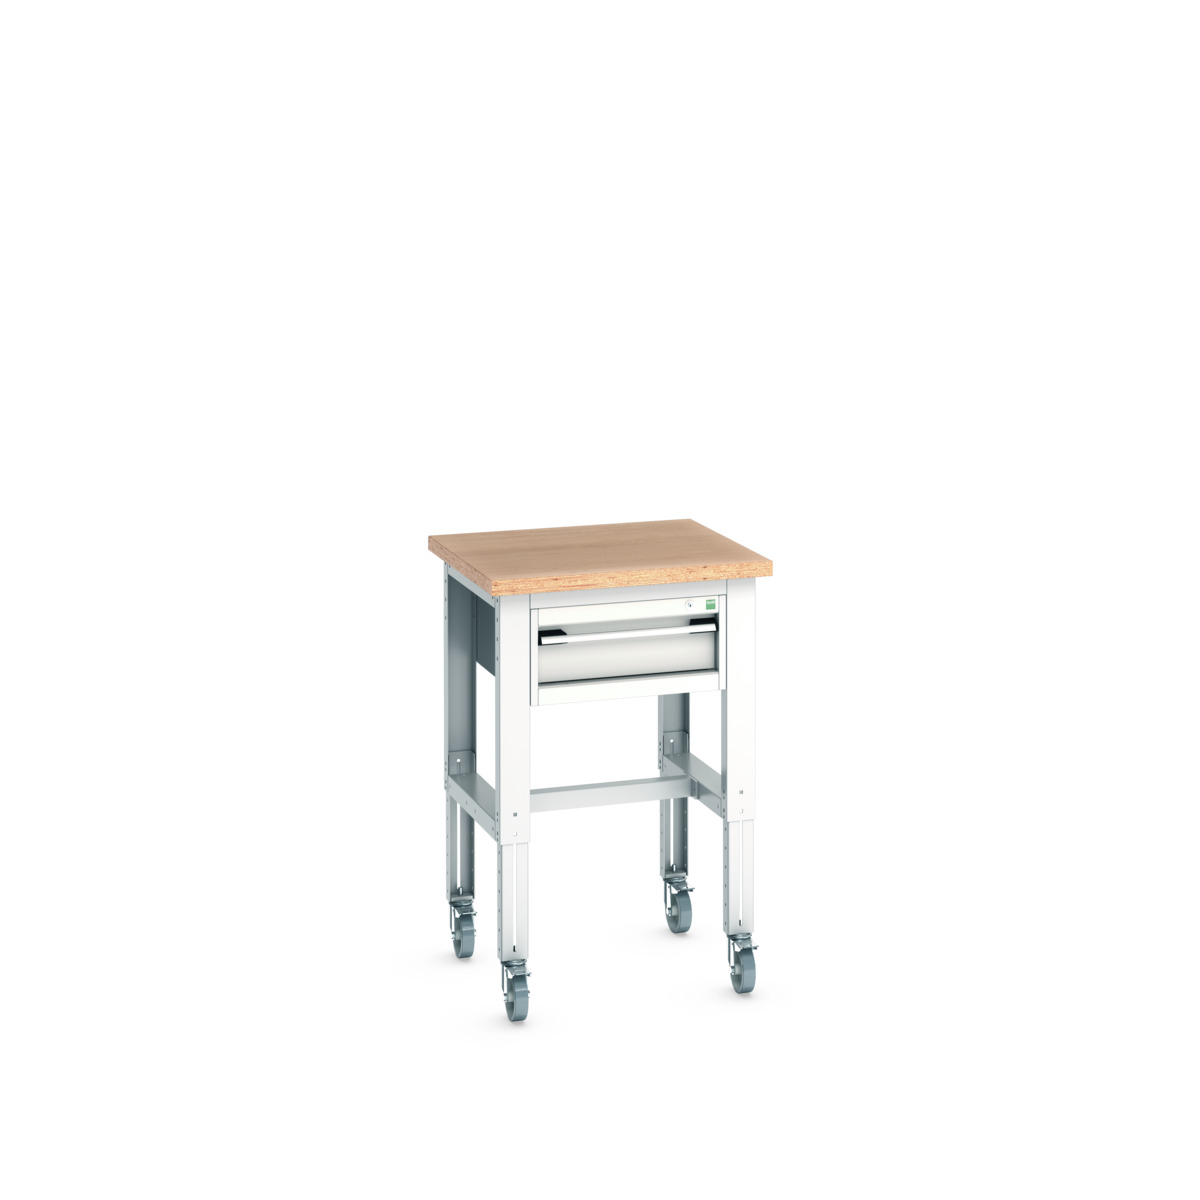 41003271.16V - cubio mobile bench adj height (mpx)